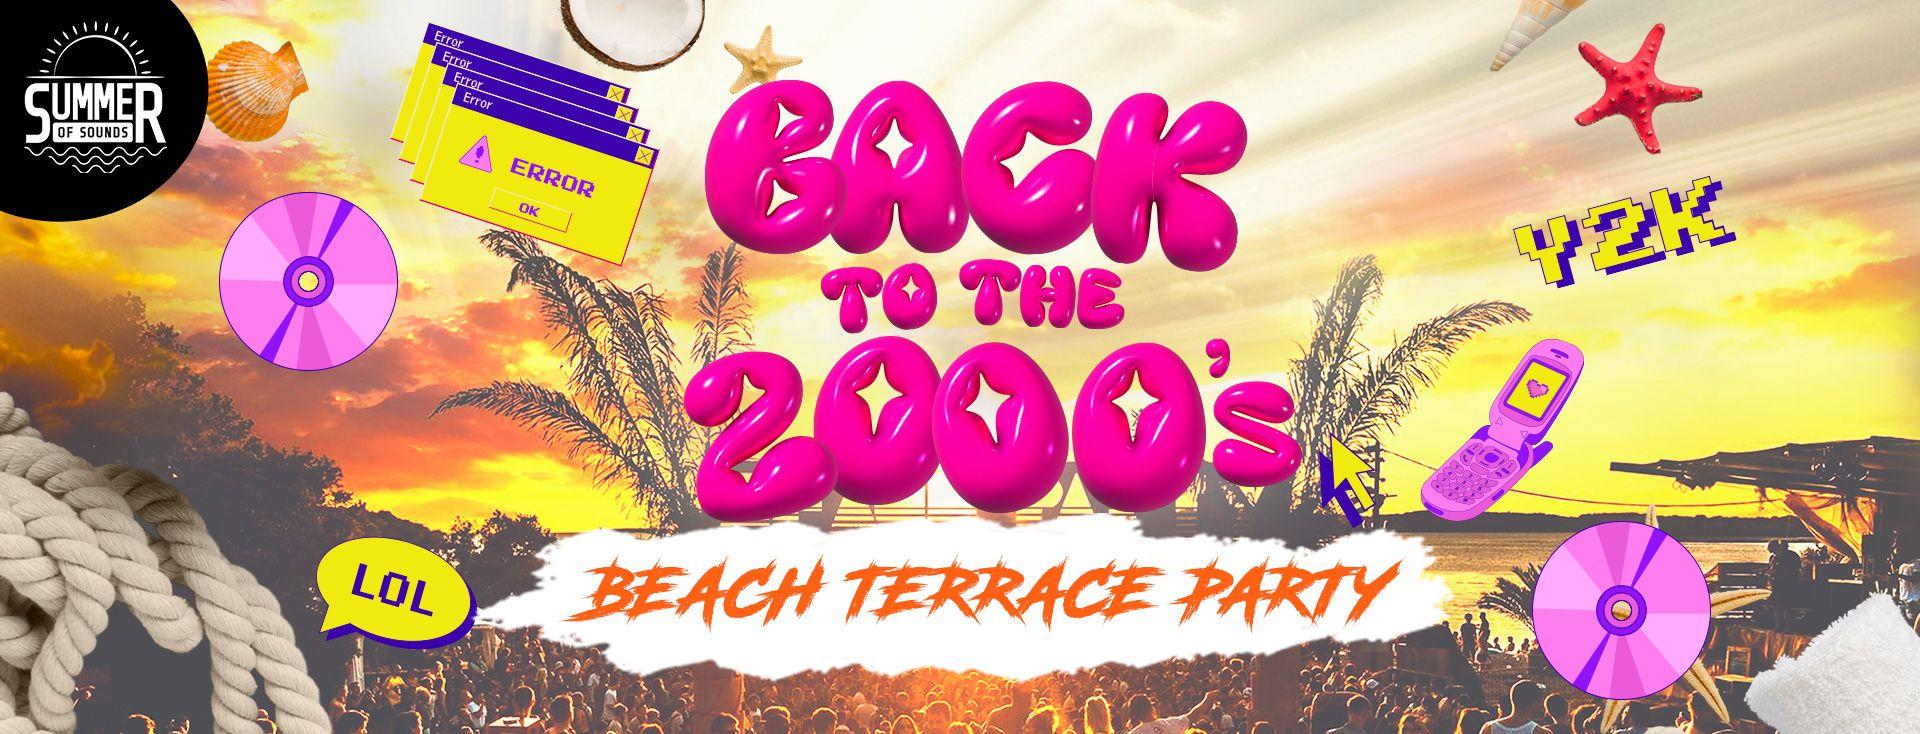 Back To The 2000's Beach Terrace Party - Brighton